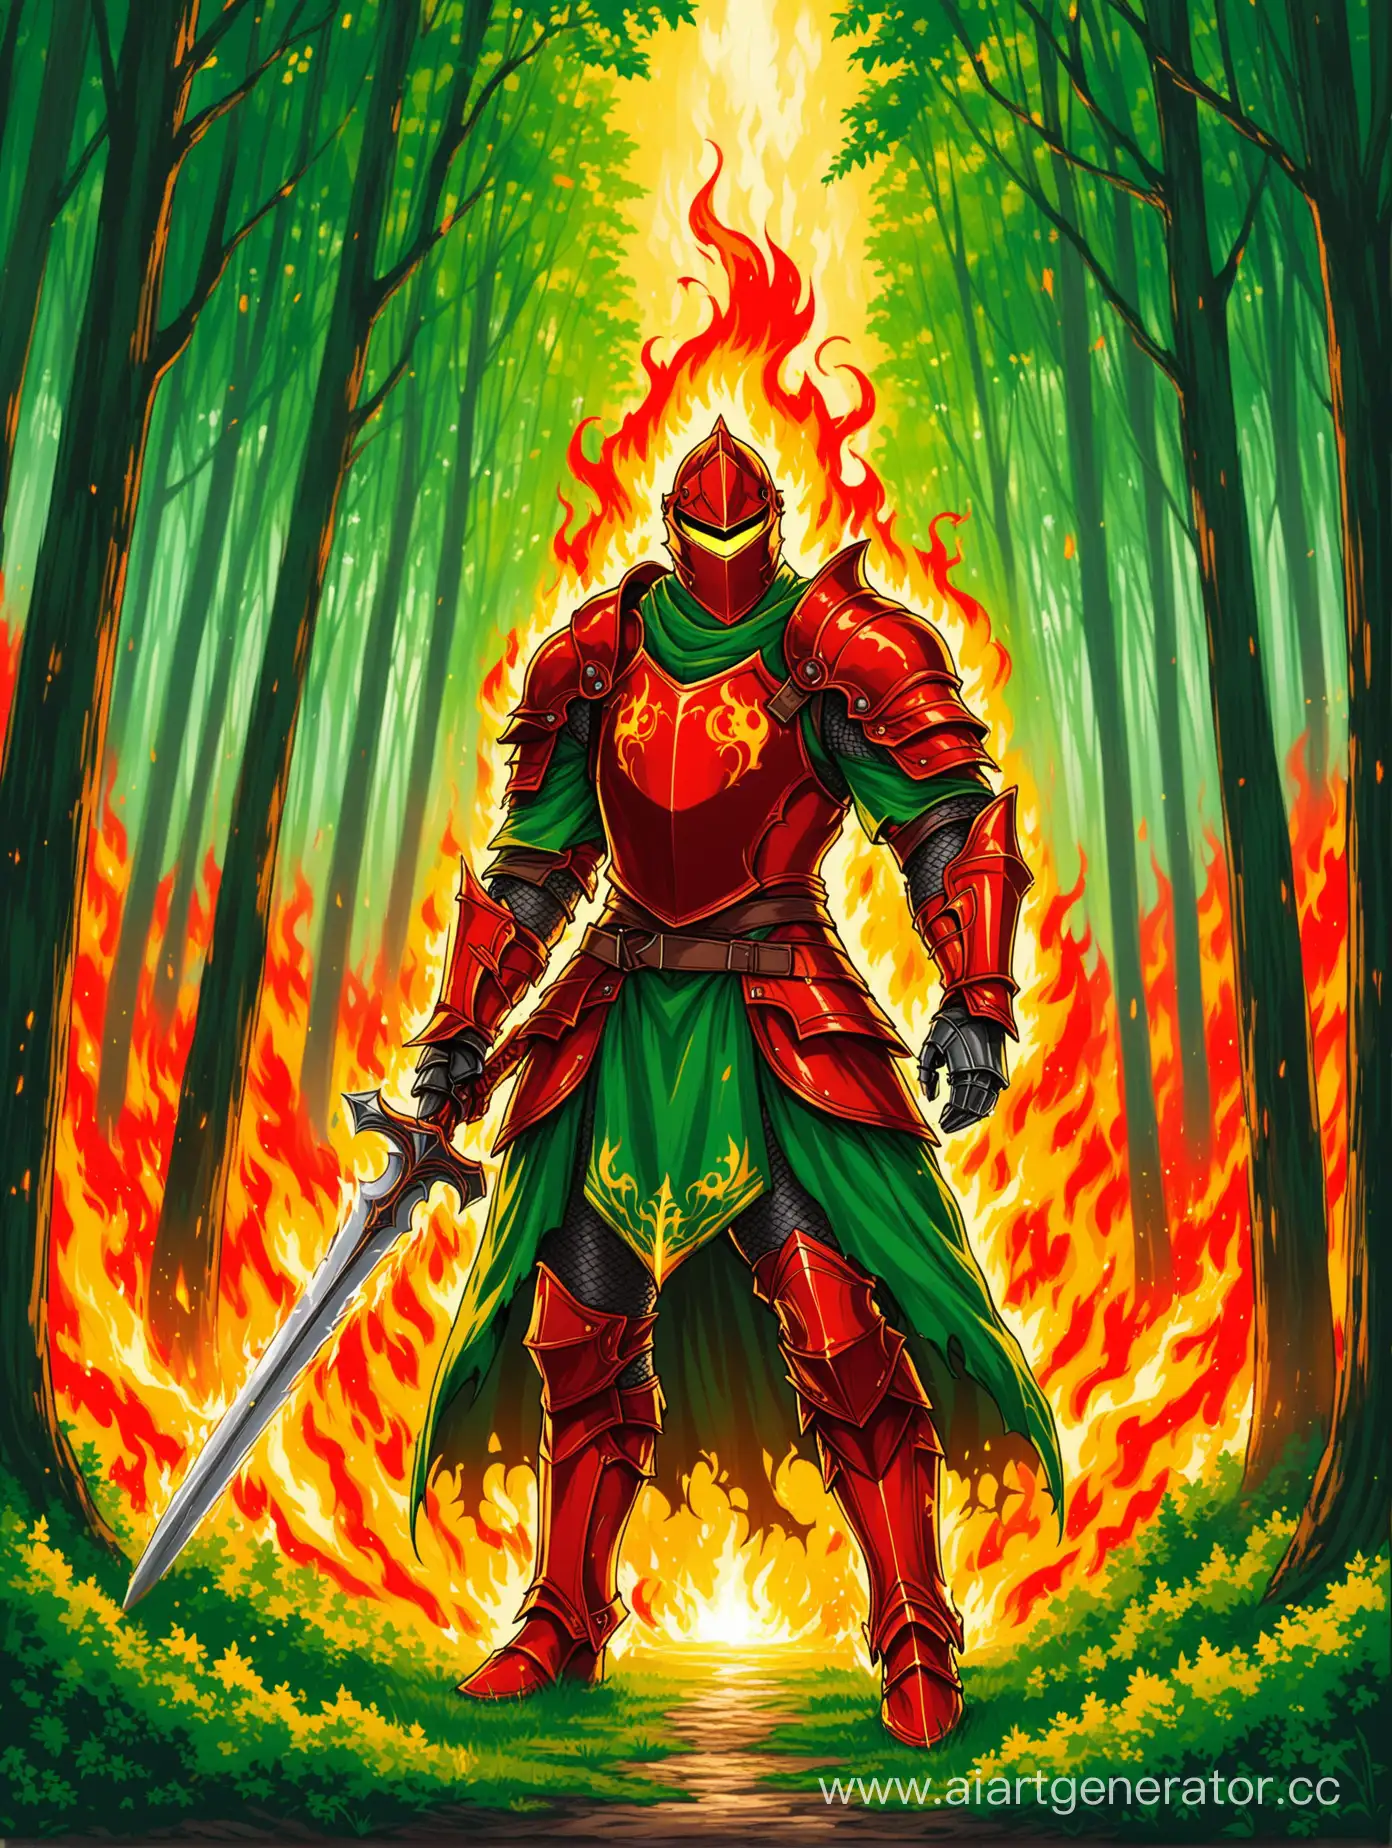 Valiant-Knight-in-Lush-Embrace-of-Verdant-Forest-near-Home